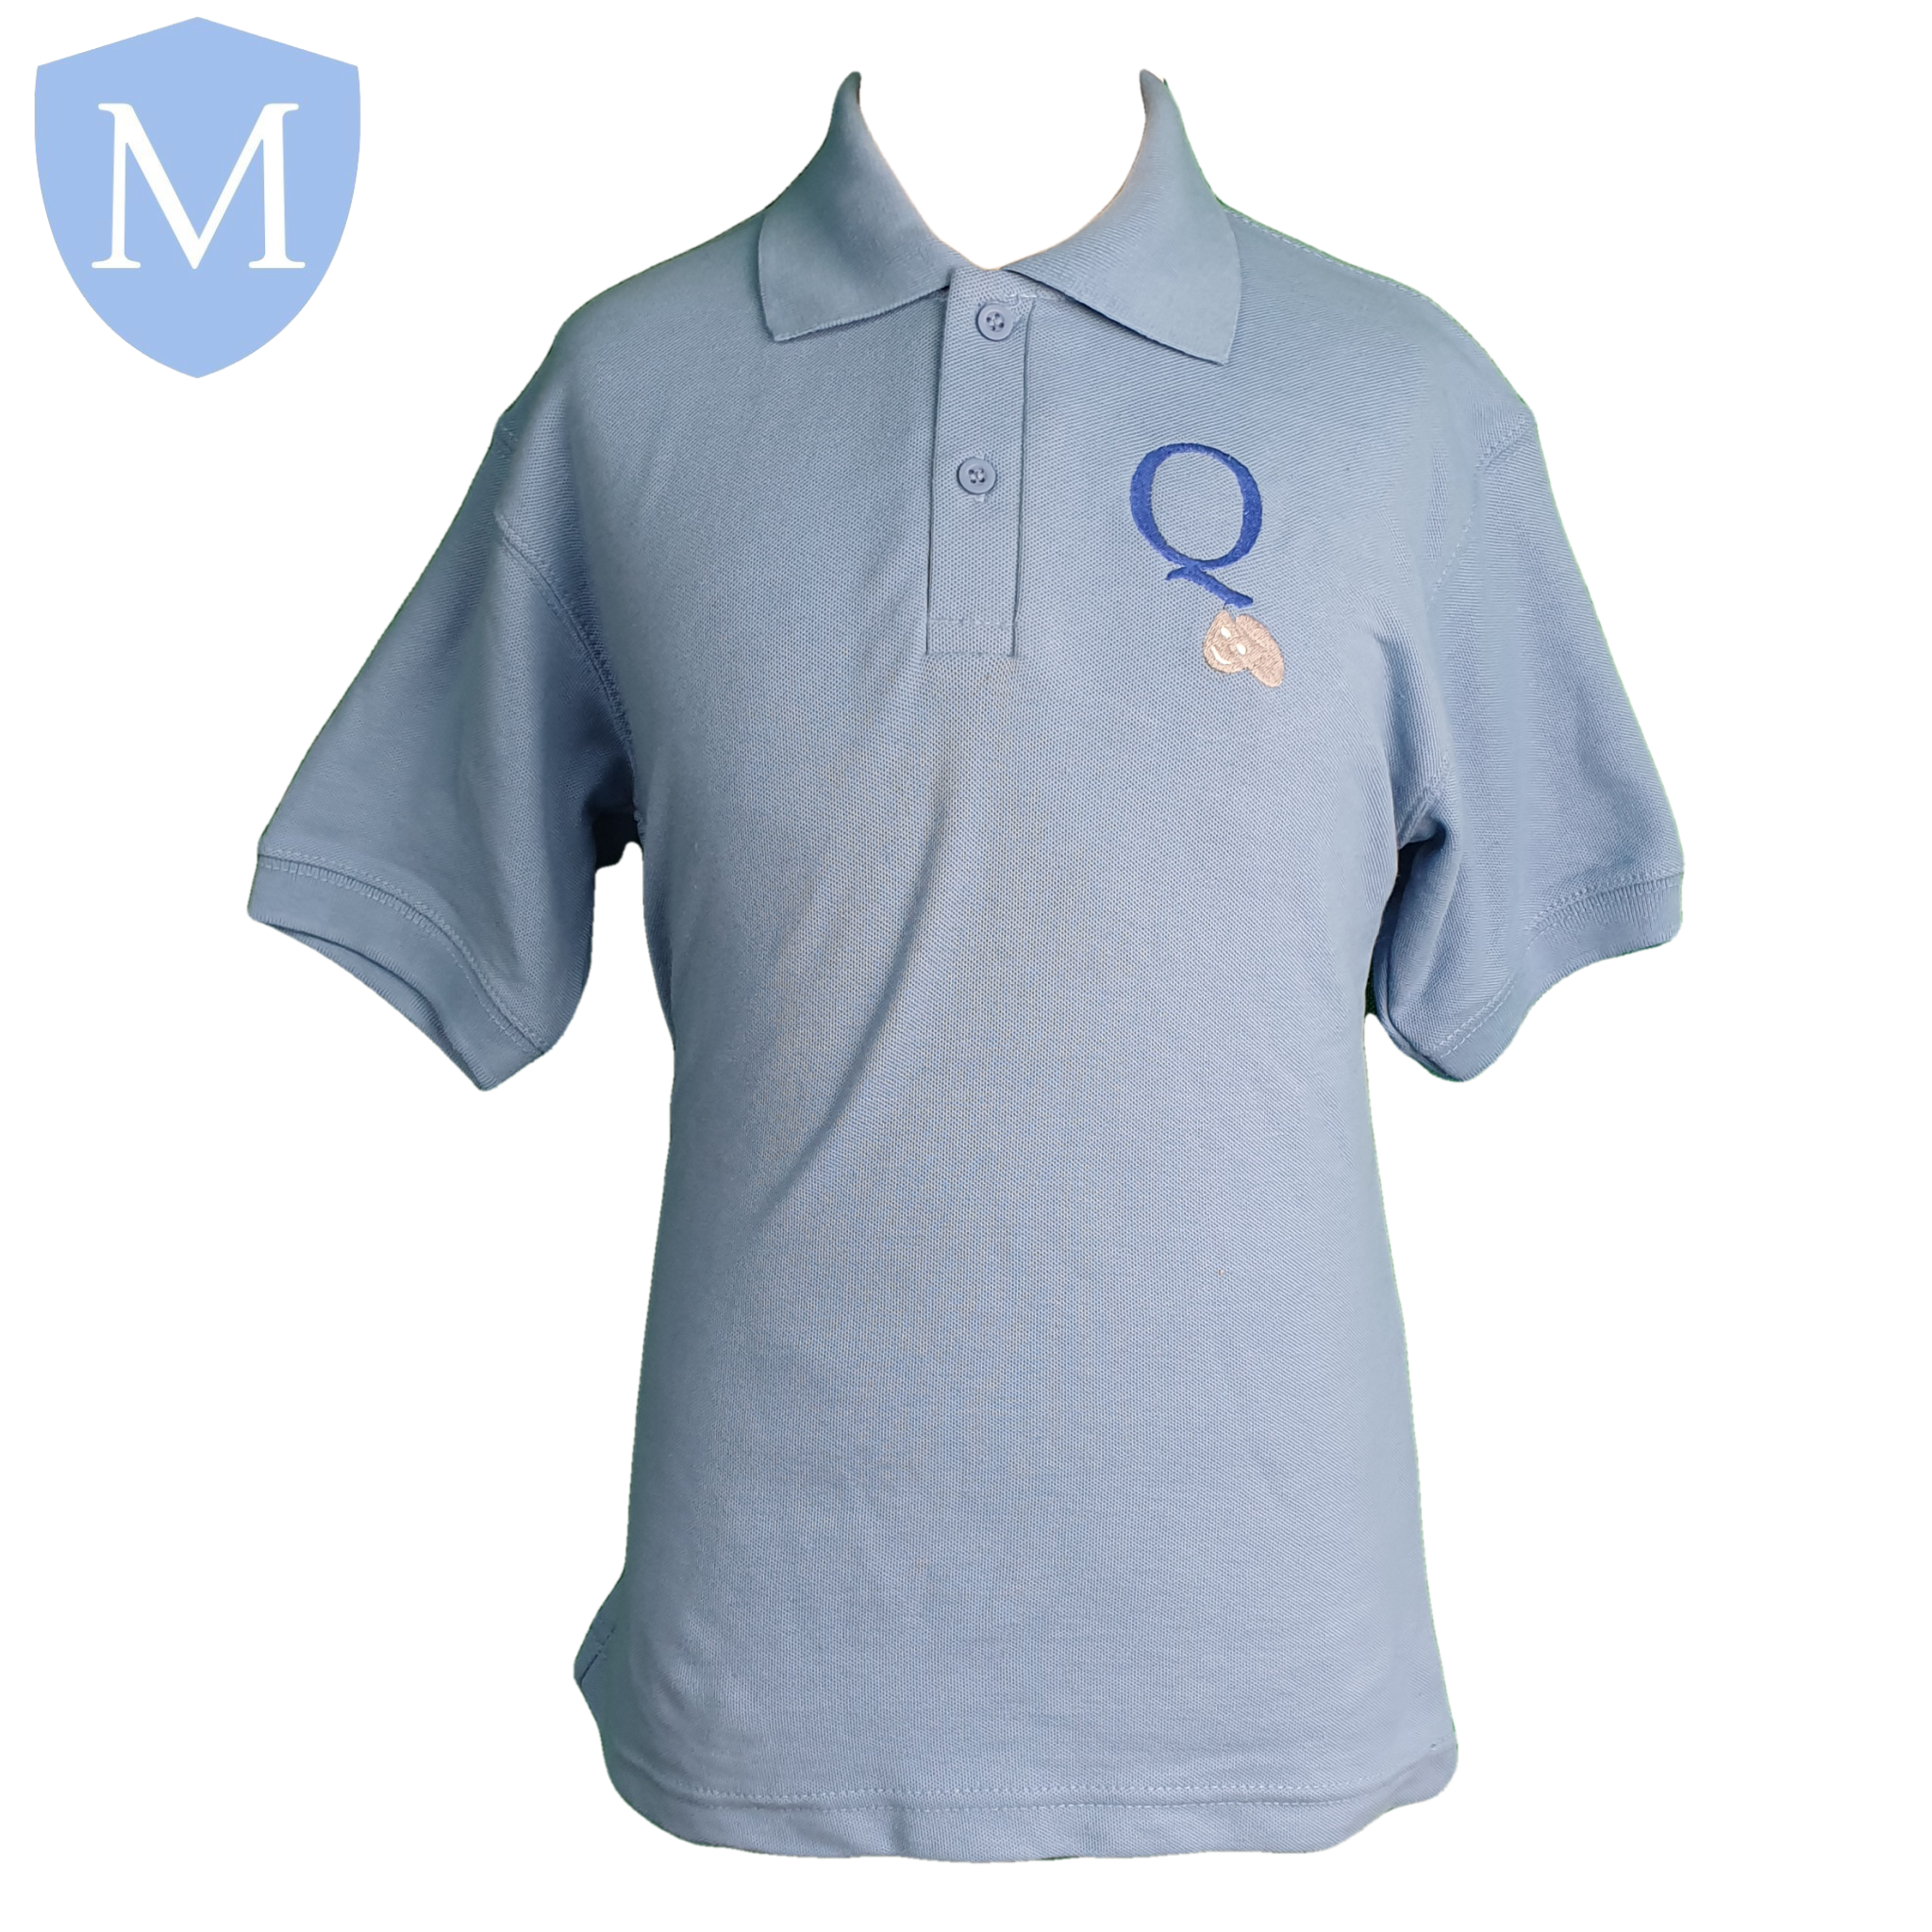 Queensbridge Short Sleeved Polo Shirt Small,11-12 Years,13 Years,2XL,9-10 Years,Large,Medium,X-Large